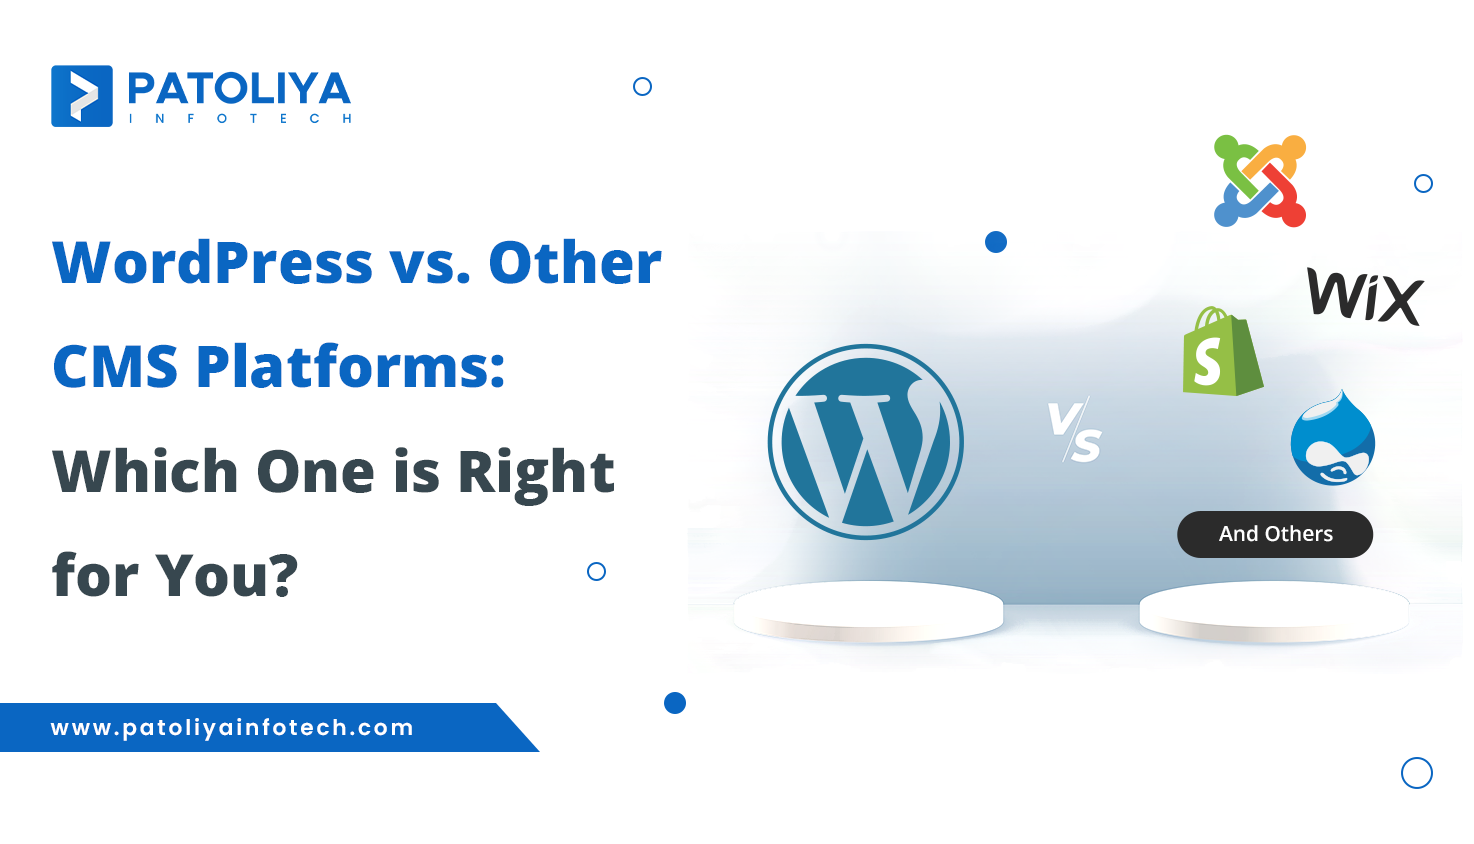 WordPress vs. Other CMS Platforms: Which One is Right for You?